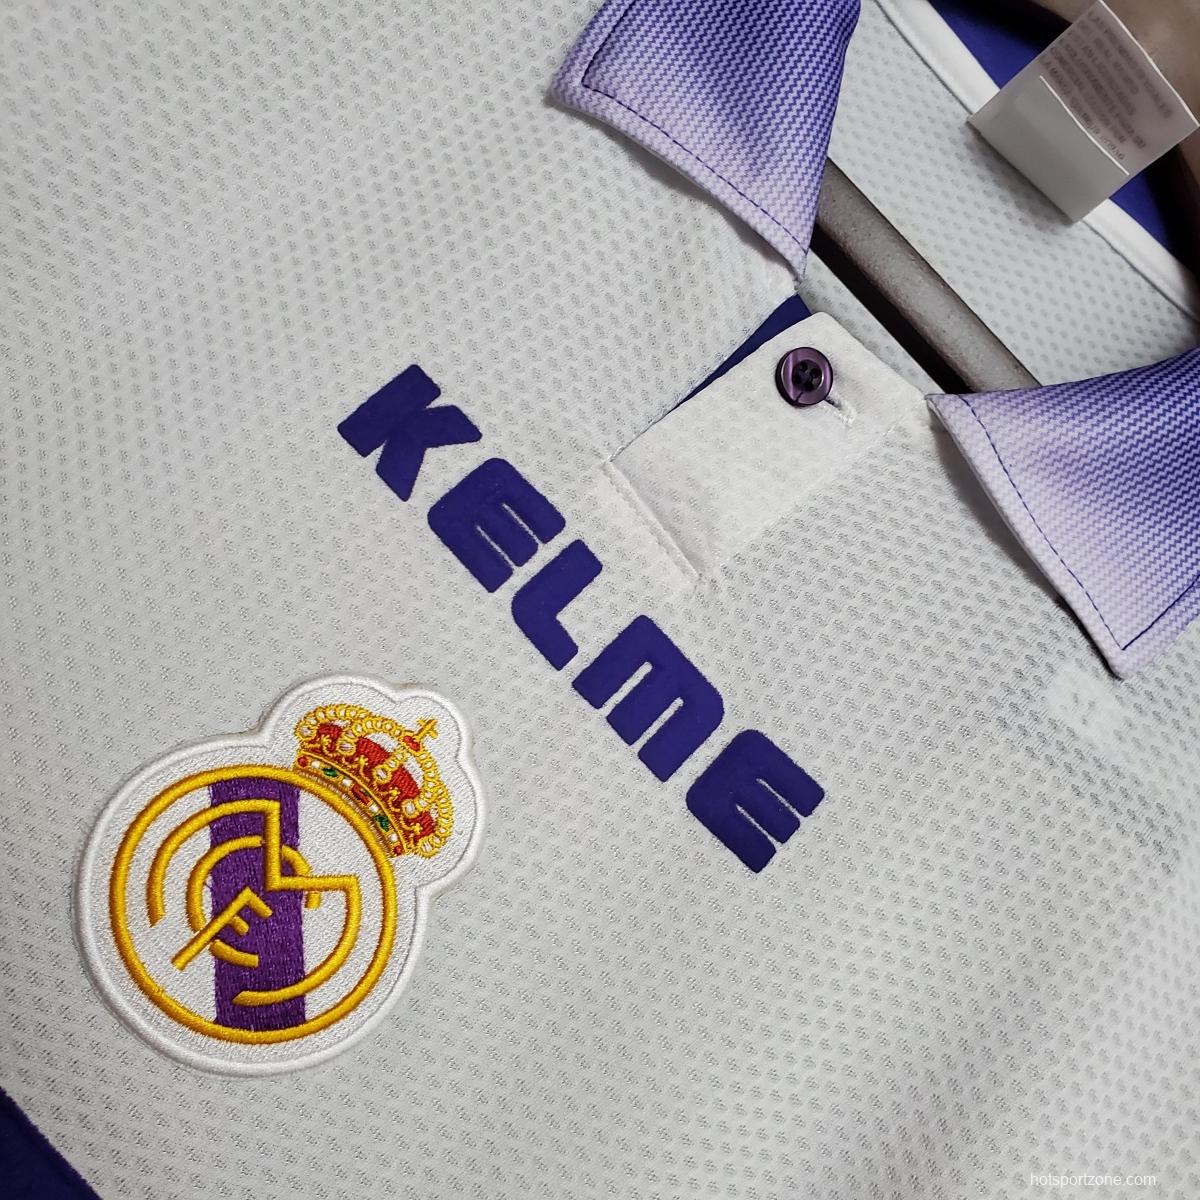 Retro Real Madrid 97/98 home Soccer Jersey